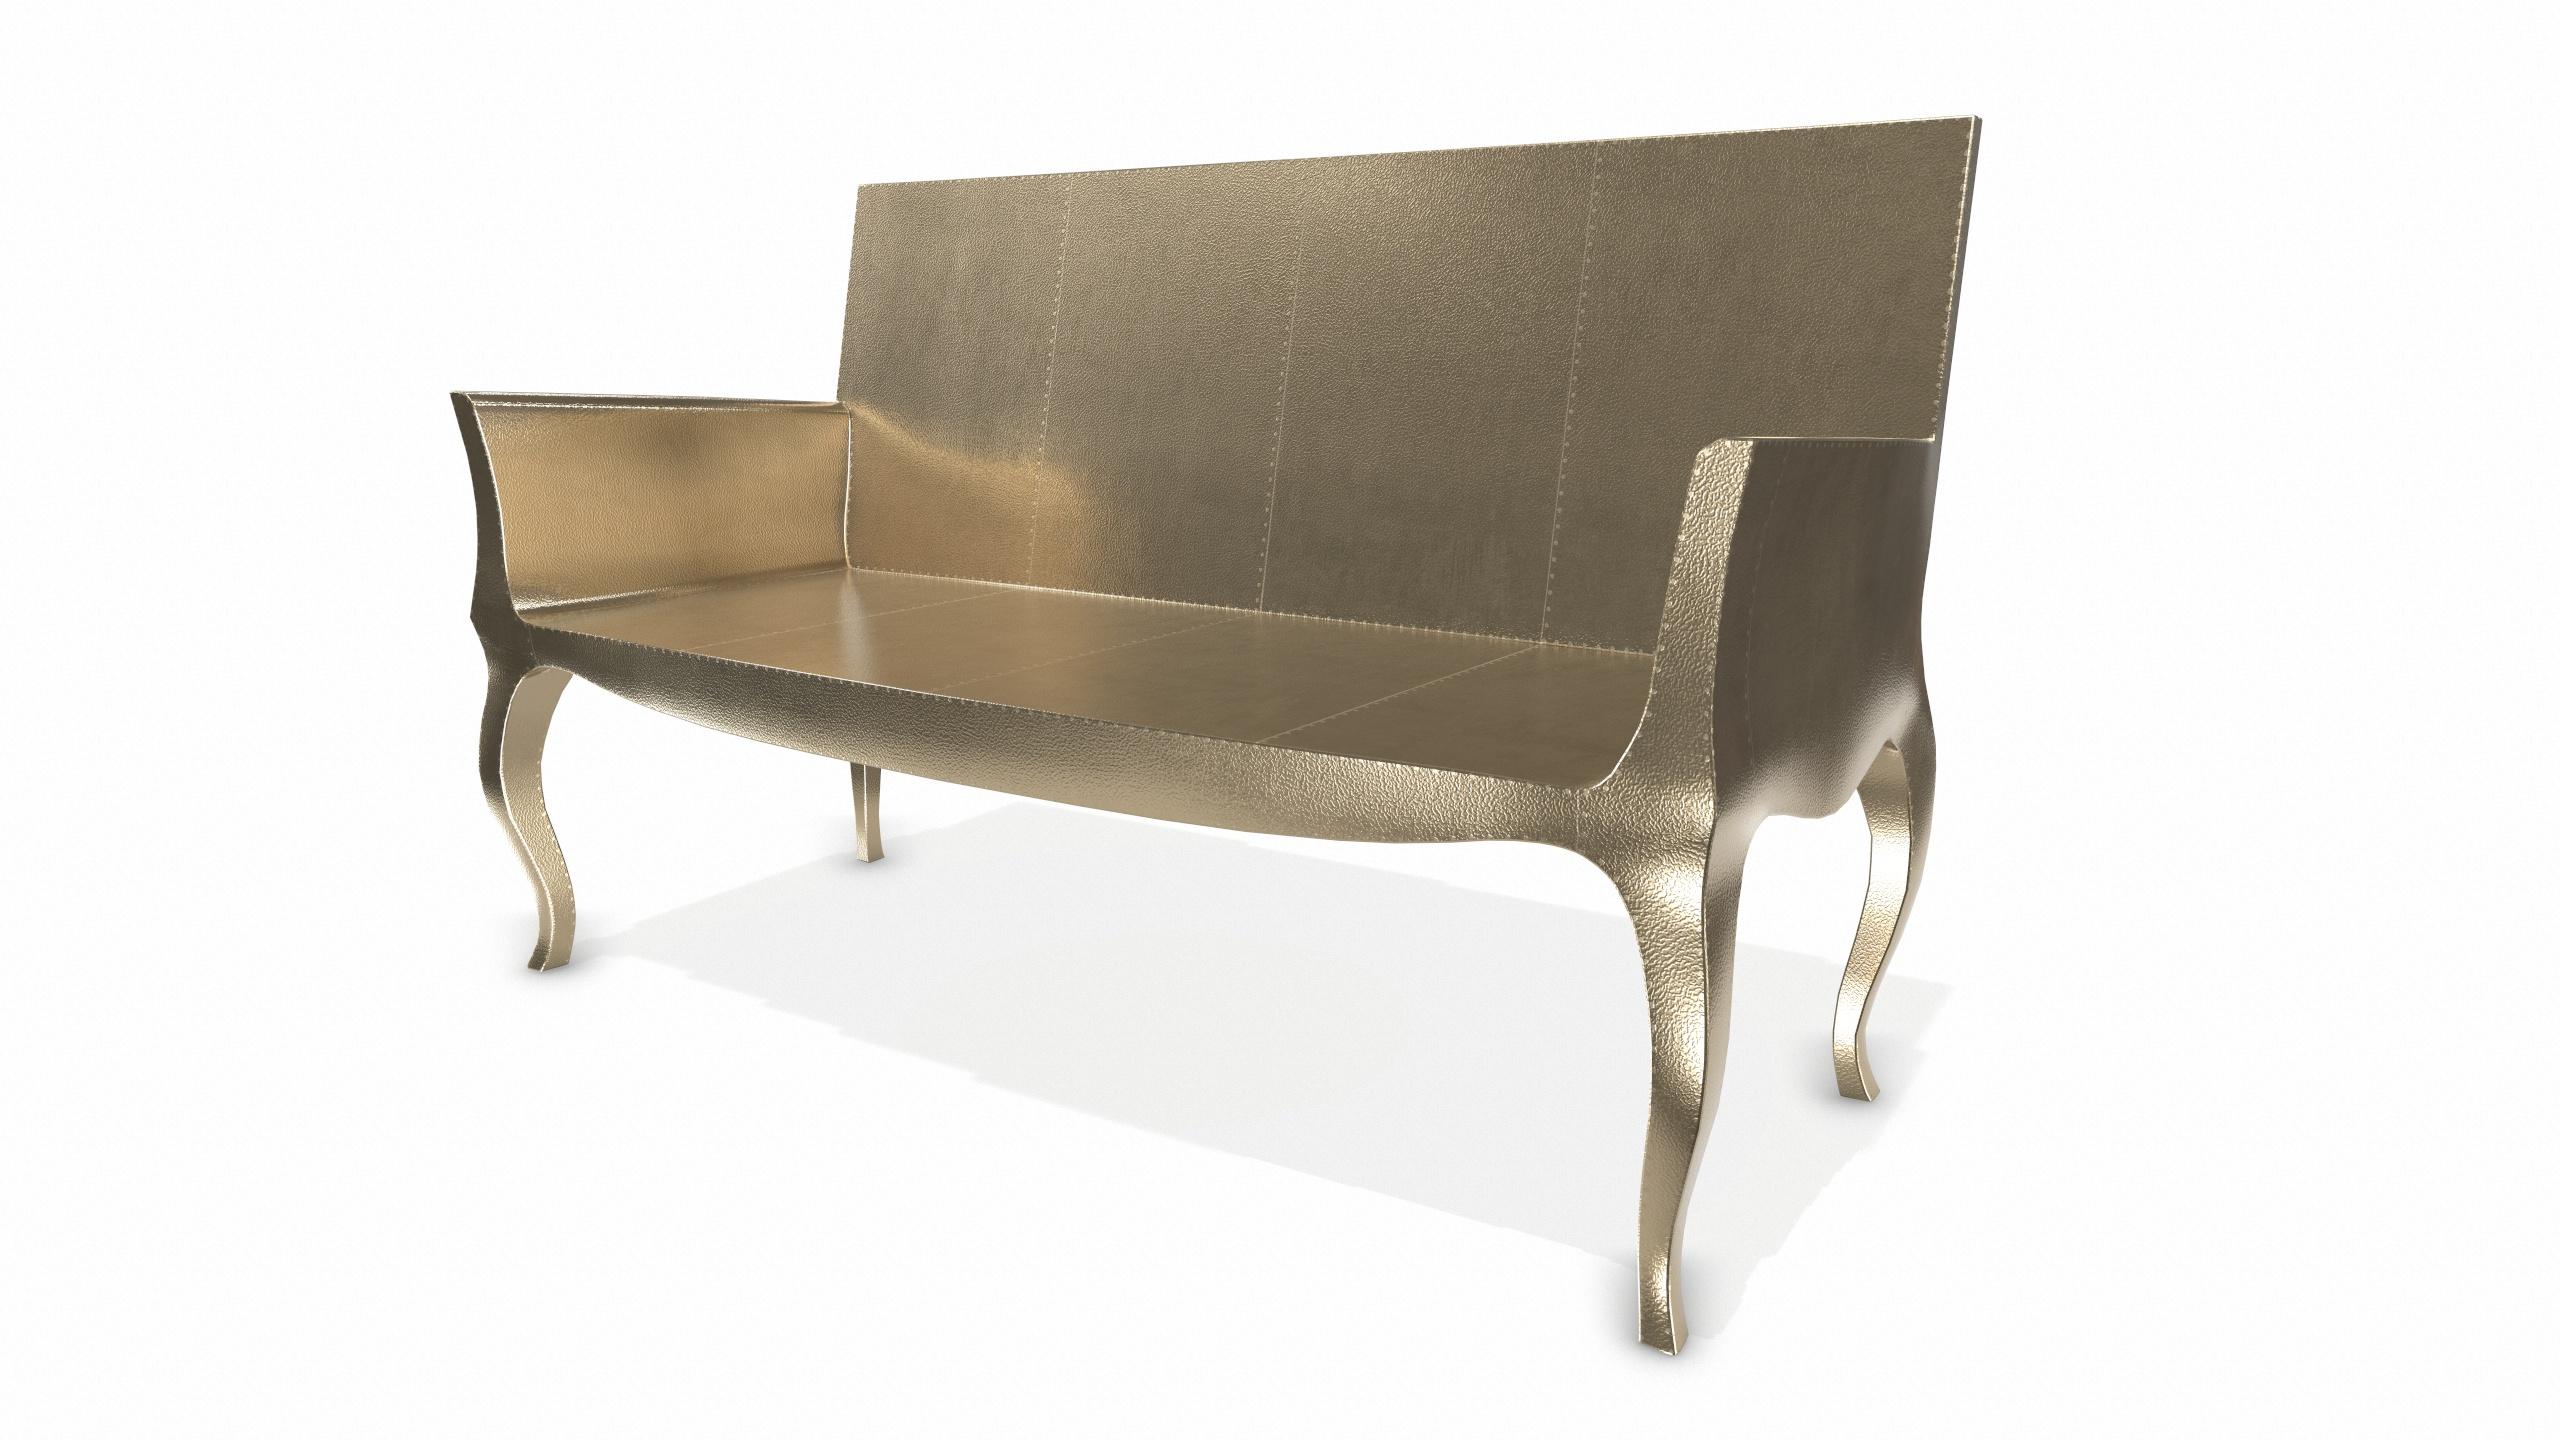 Wood Louise Settee Art Deco Daybeds in Fine Hammered Brass by Paul Mathieu For Sale